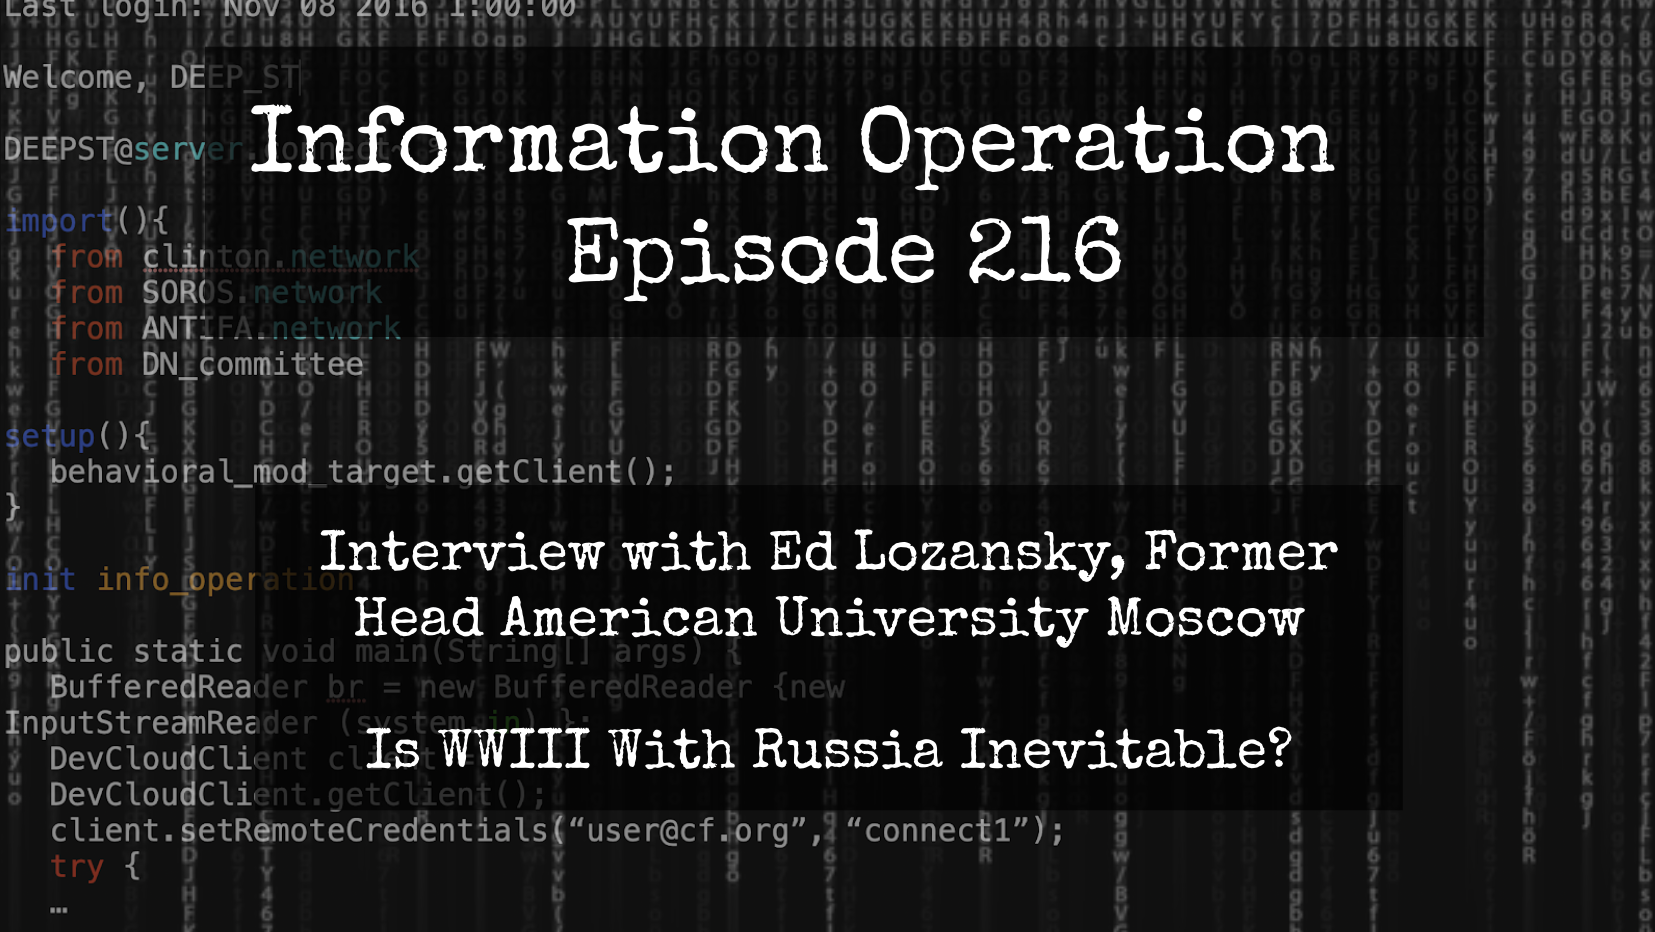 LIVE 6pm EST: IO Episode 216 - Ed Lozansky - Is Nuclear War With Russia Imminent?